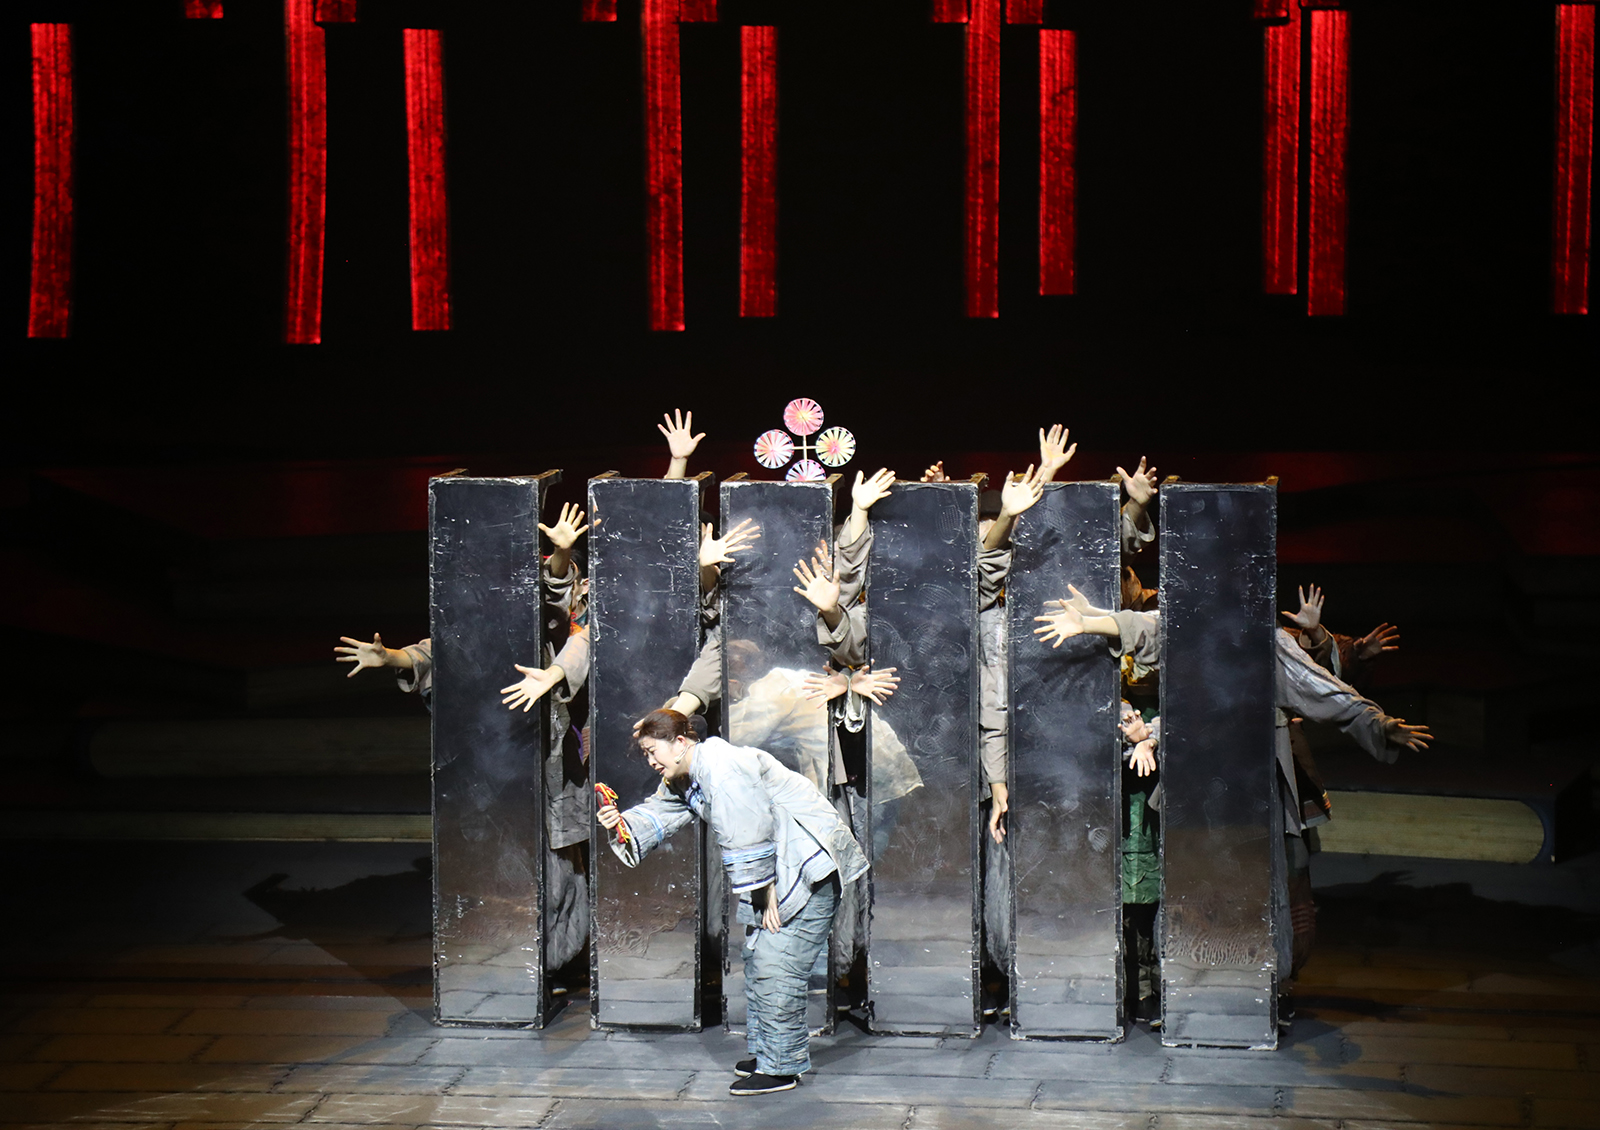 A scene from a play inspired by Lu Xun's novels featuring the struggles of Xianglin's wife in 